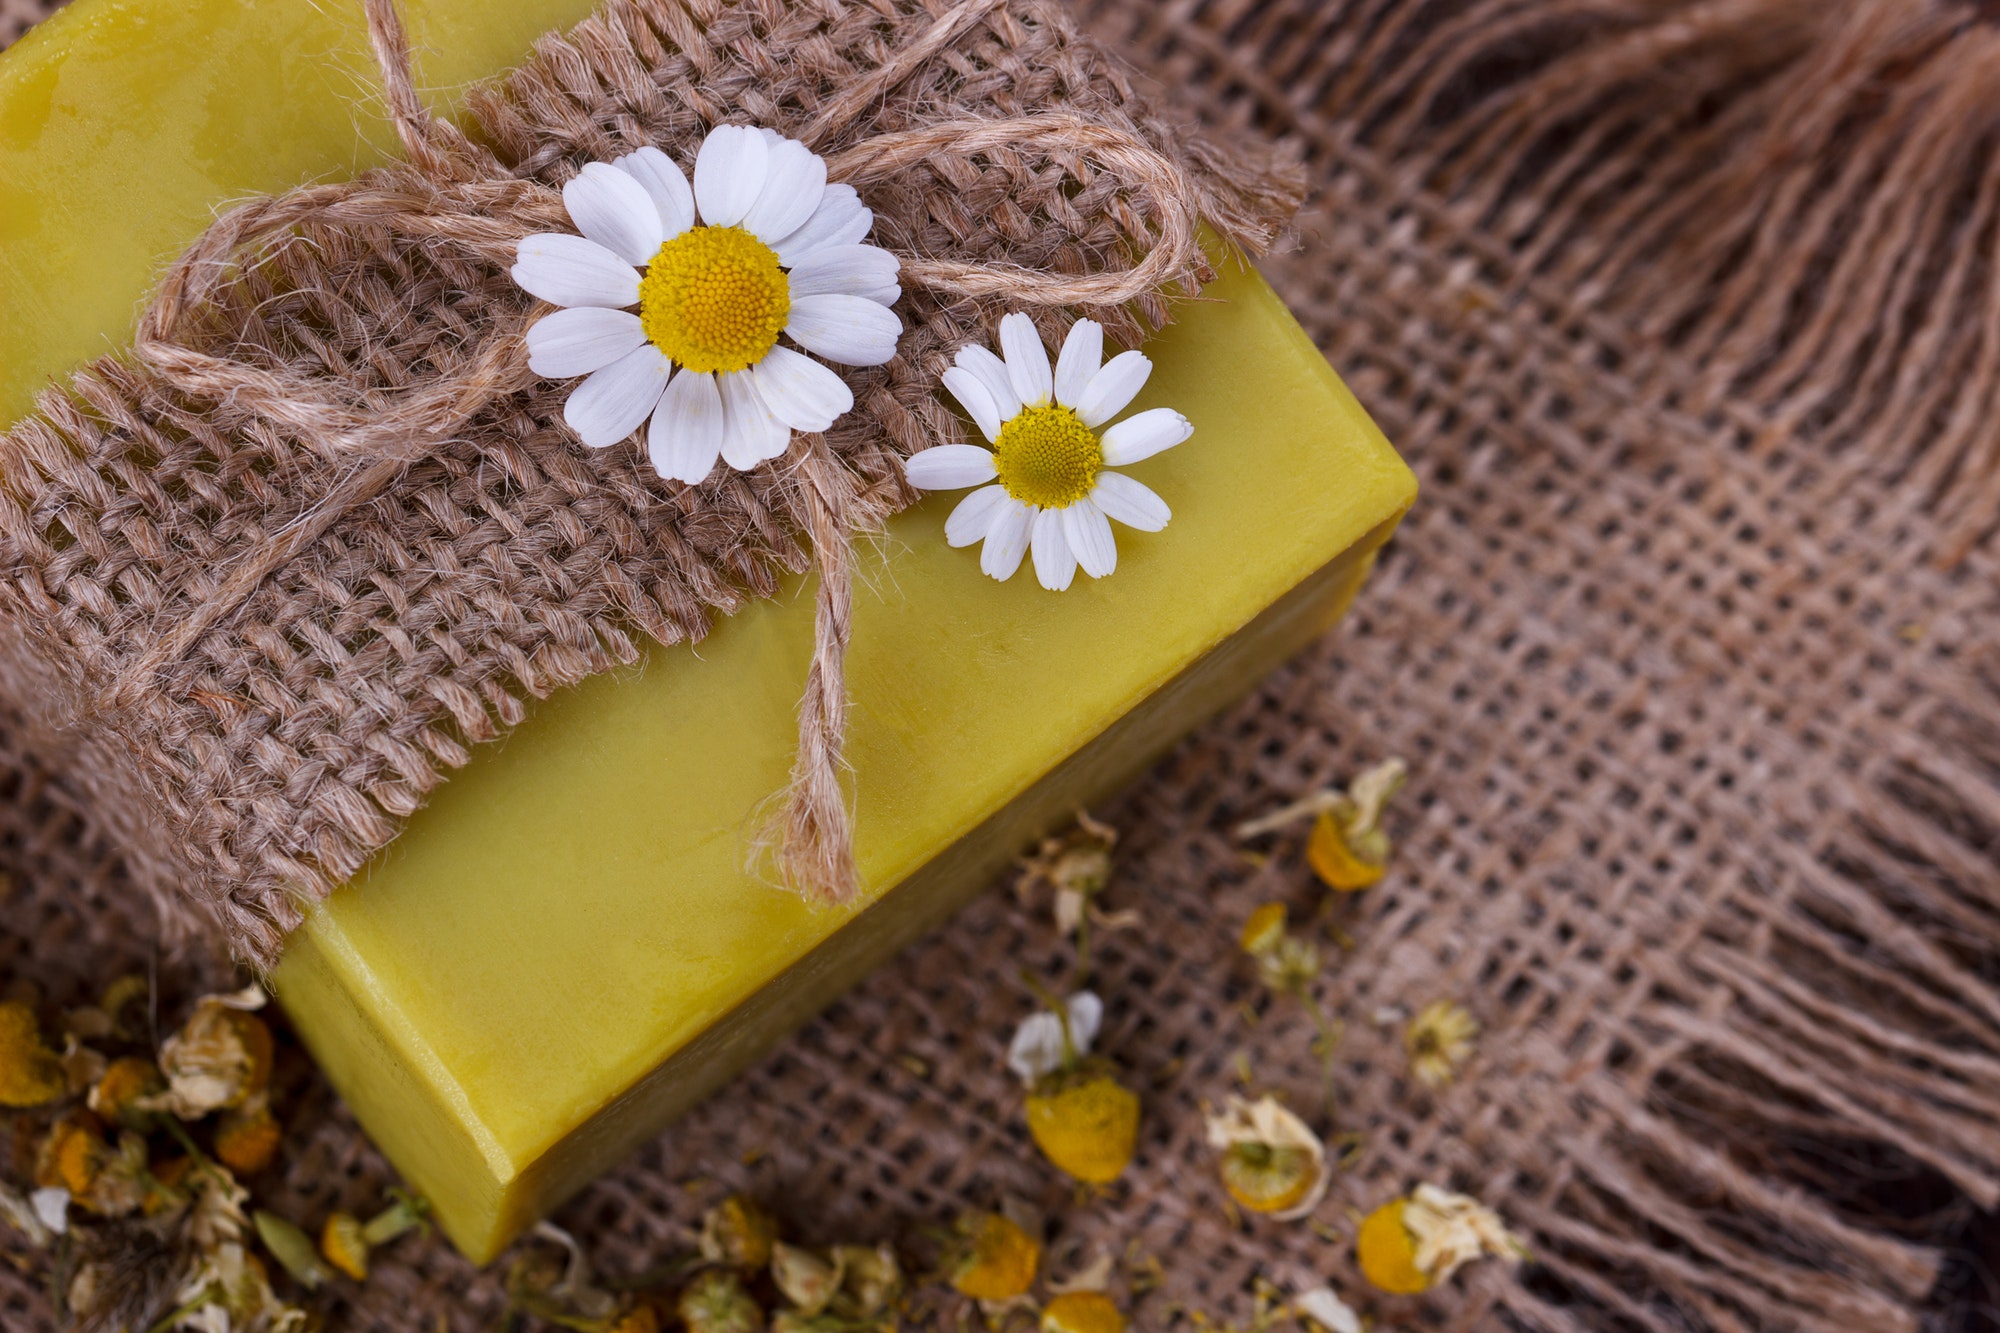 Handmade soap with chamomile